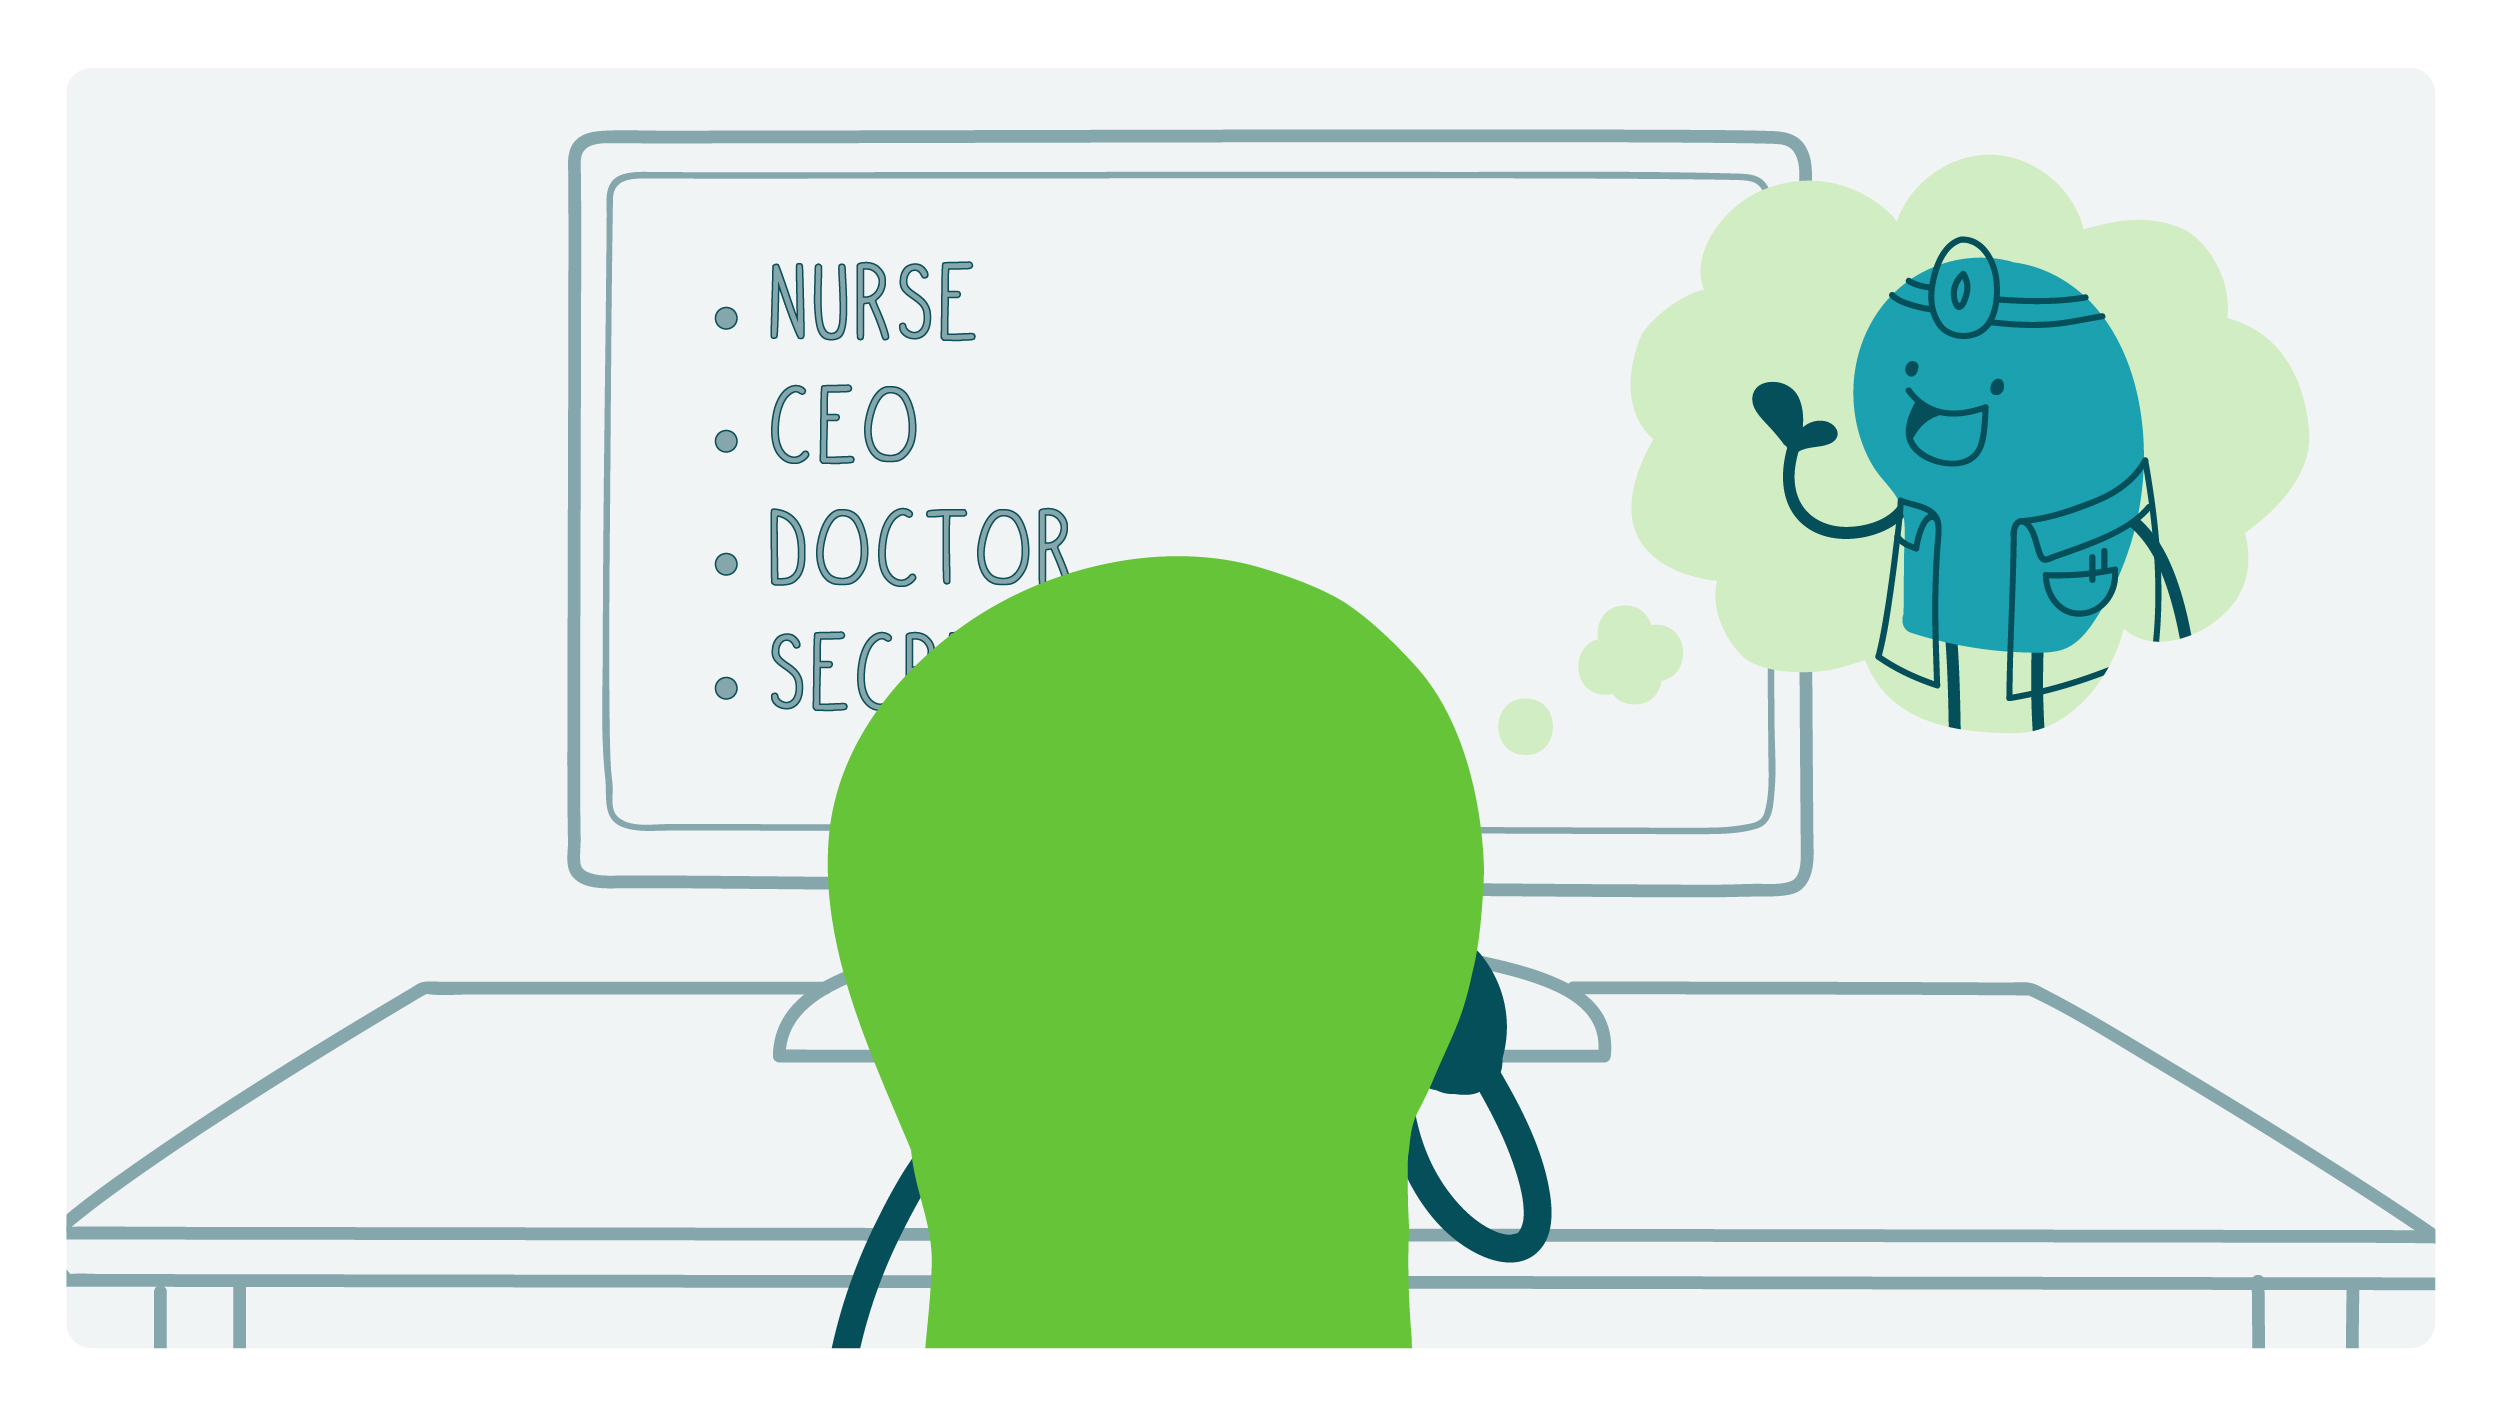 Back view of a doodle looking at a board with a list that has "Nurse," "CEO," "Doctor," and "Secr." The doodle is covering the rest of the last word. The doodle has a thought bubble above them with a smiling doctor doodle.